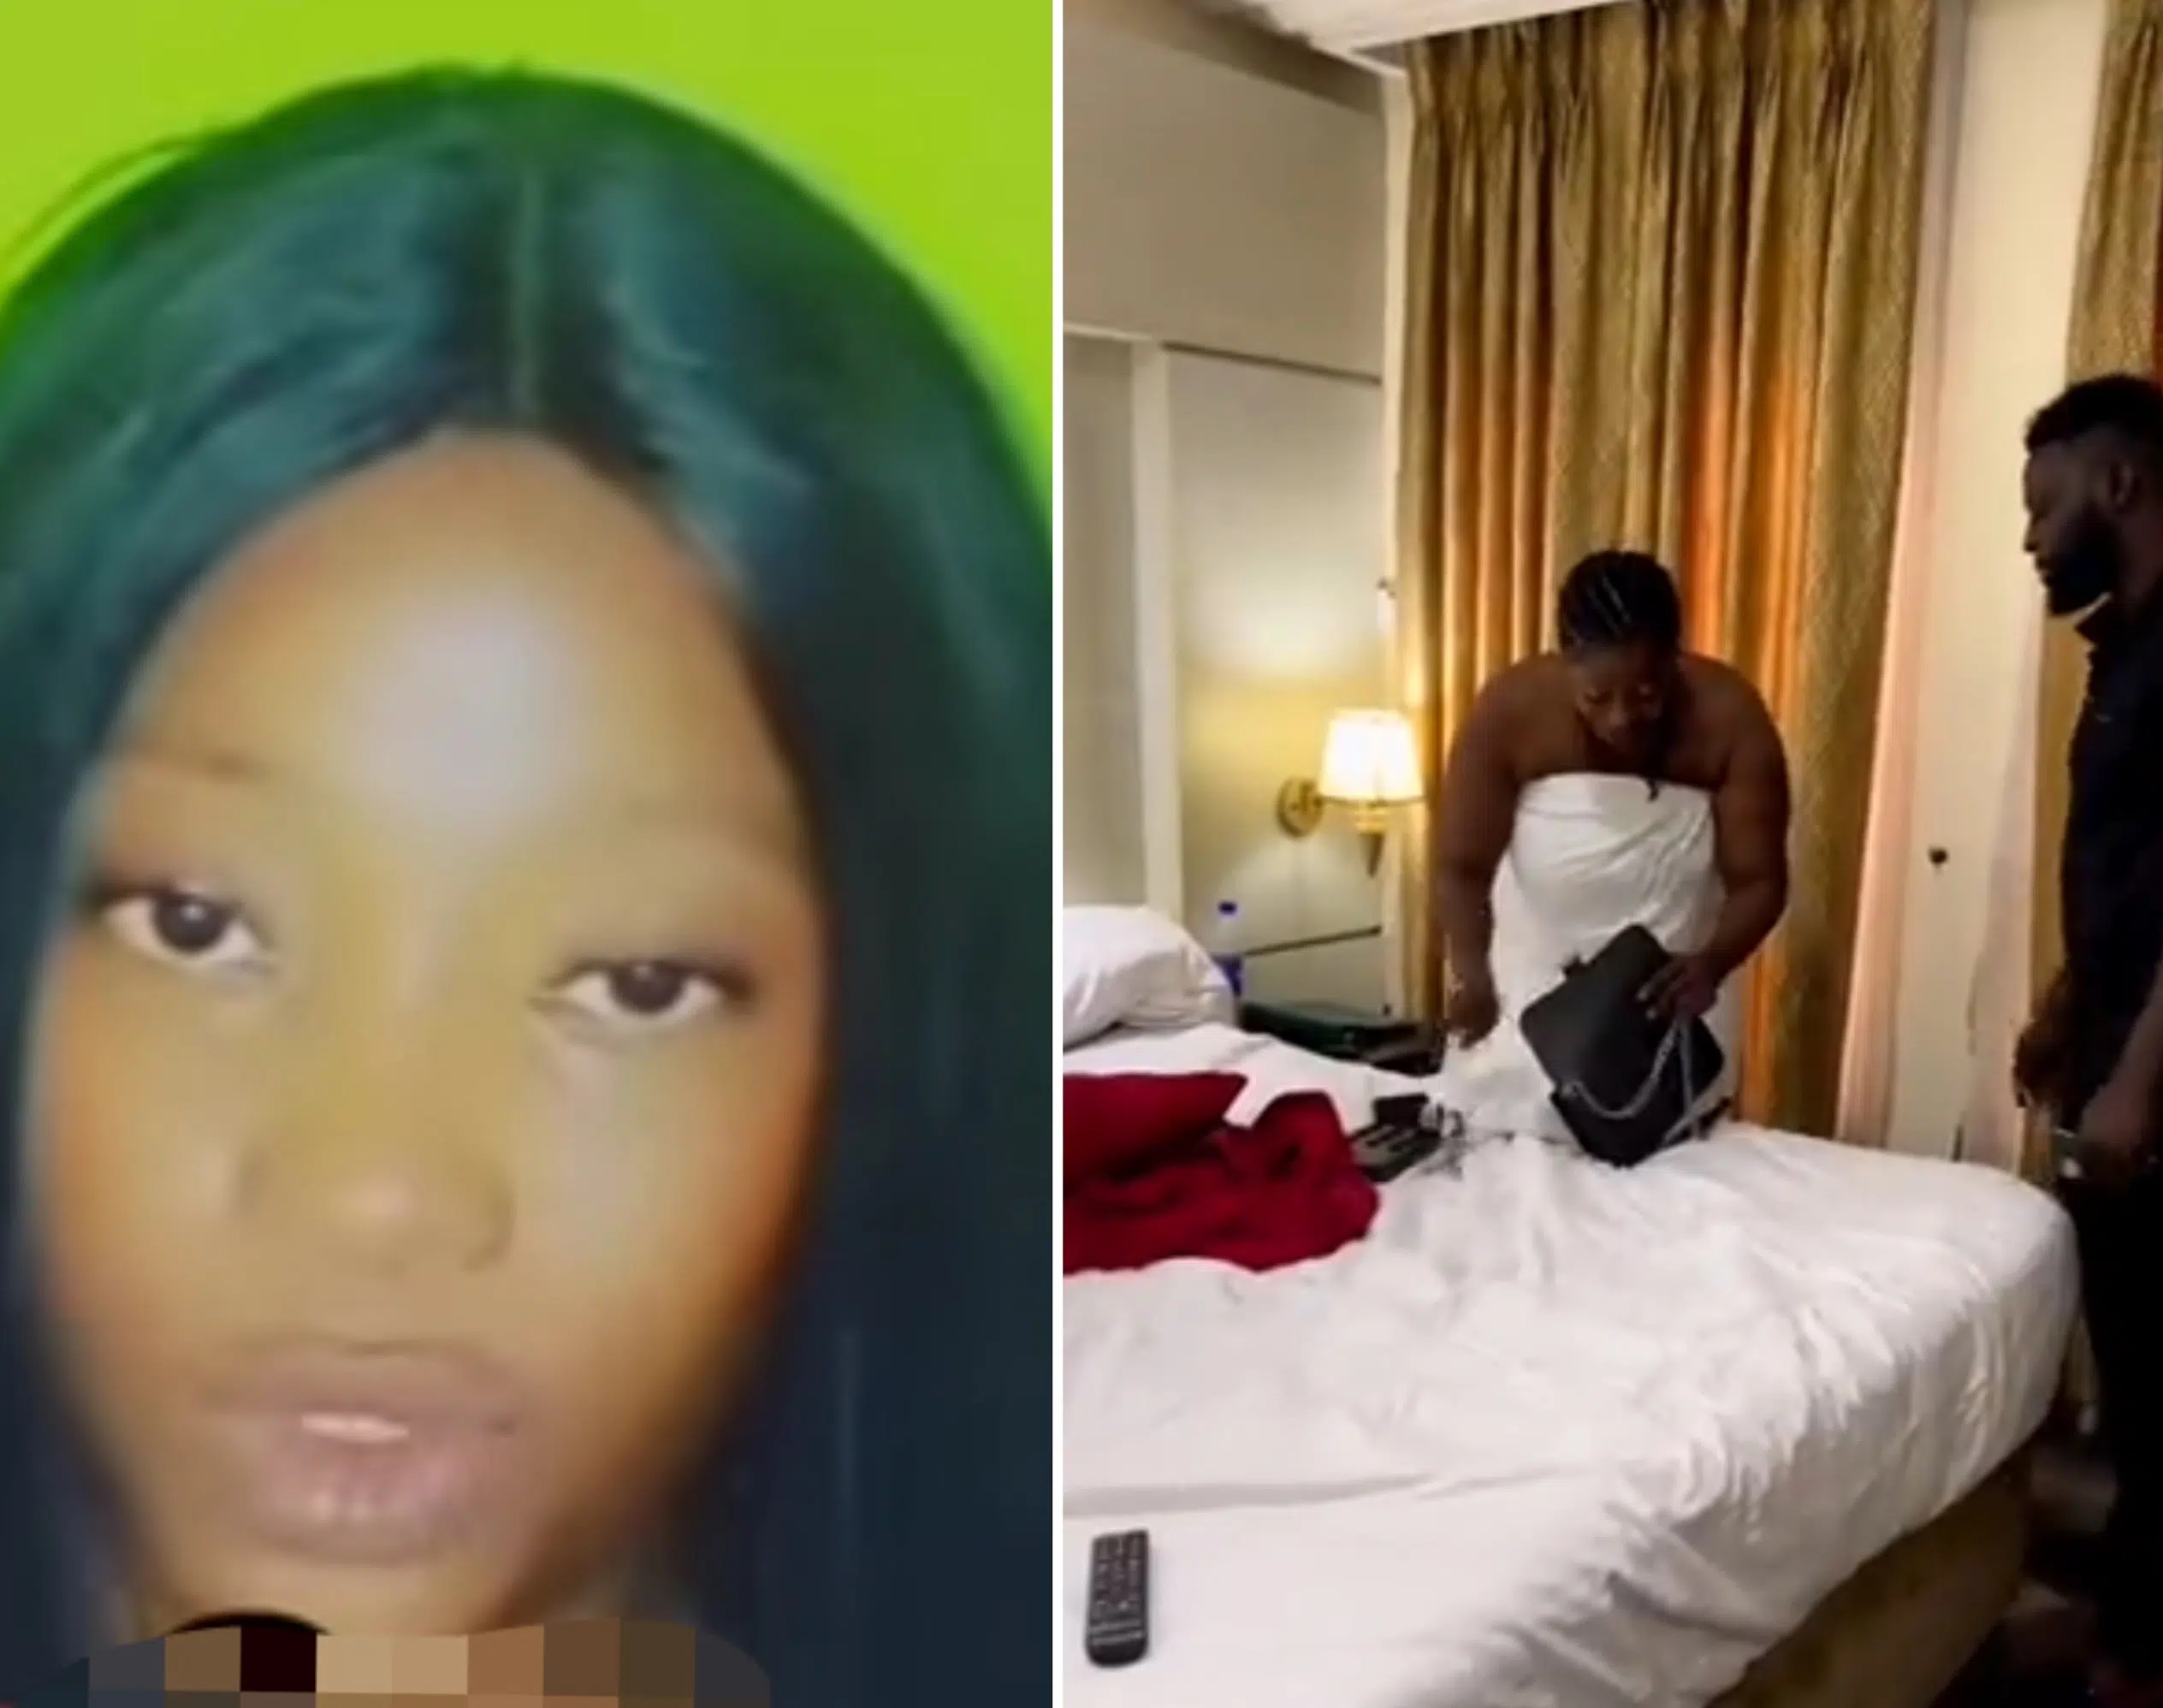 “It Was A Skit” – Lady Accused Of Stealing Passport And Diamonds At A Hotel Breaks Silence In New Video